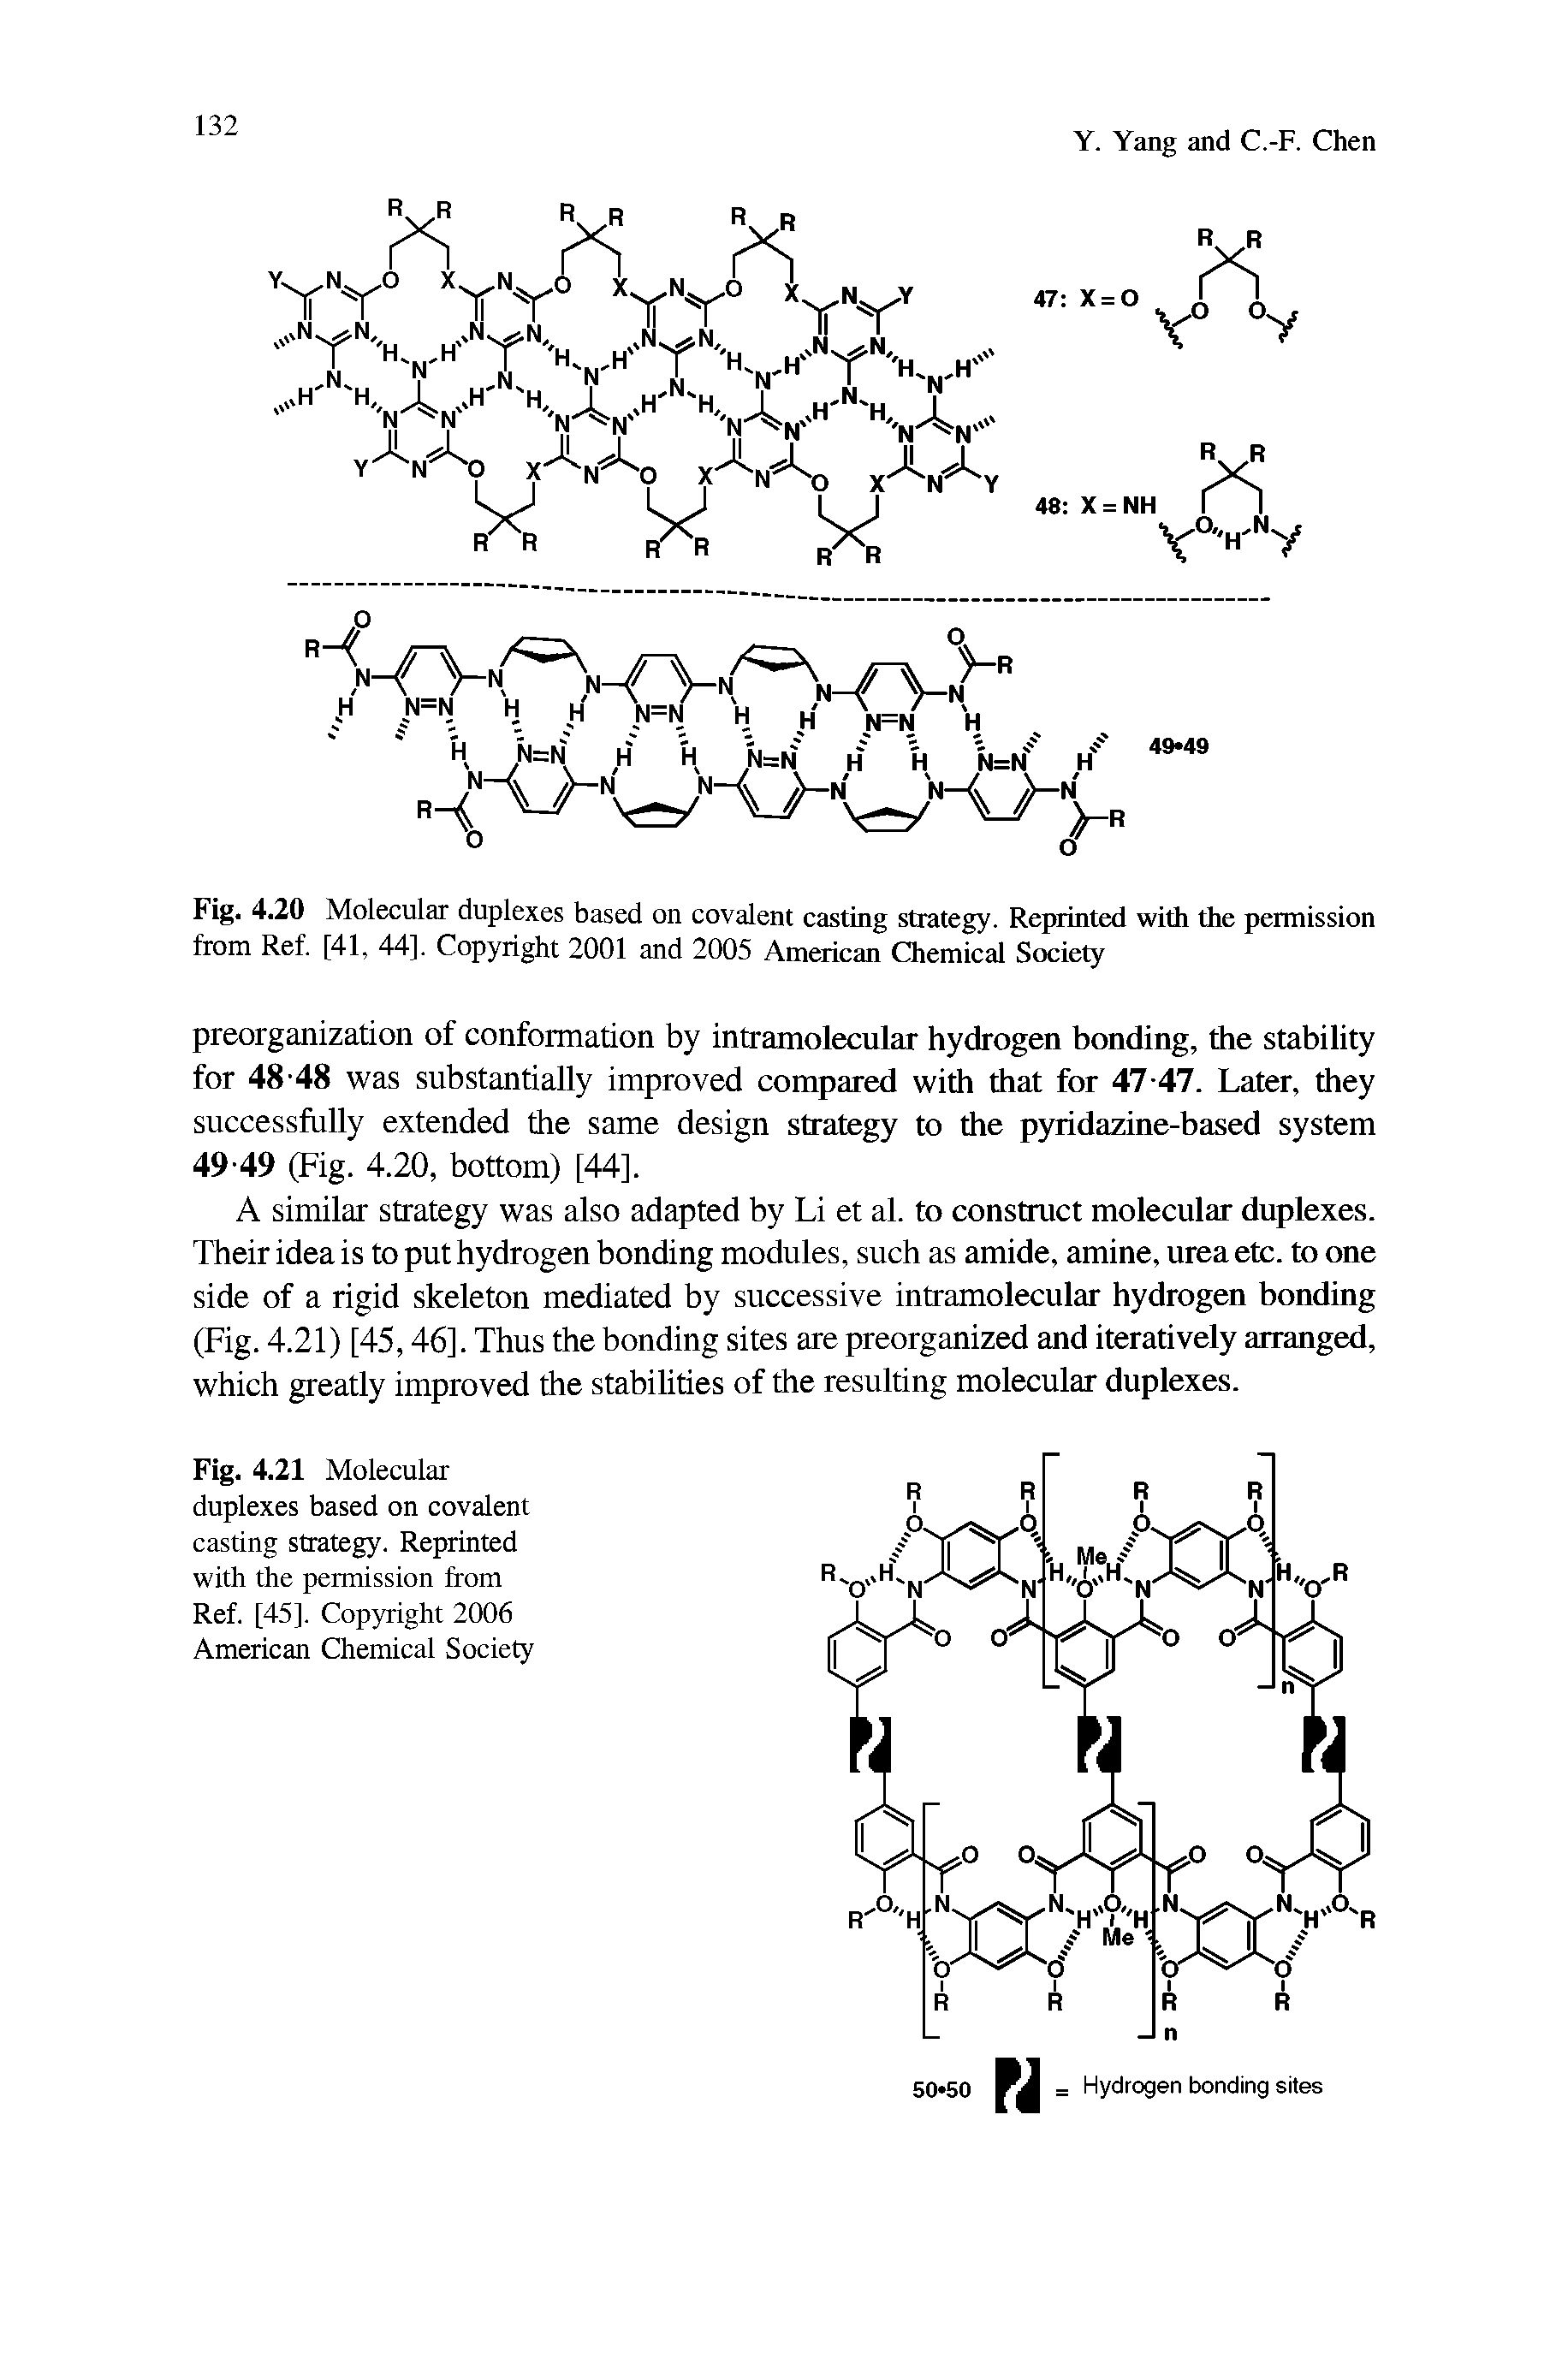 Fig. 4.20 Molecular duplexes based on covalent casting strategy. Repinted with the permission from Ref. [41, 44]. Copyright 2001 and 2005 Amaican Chemical Society...